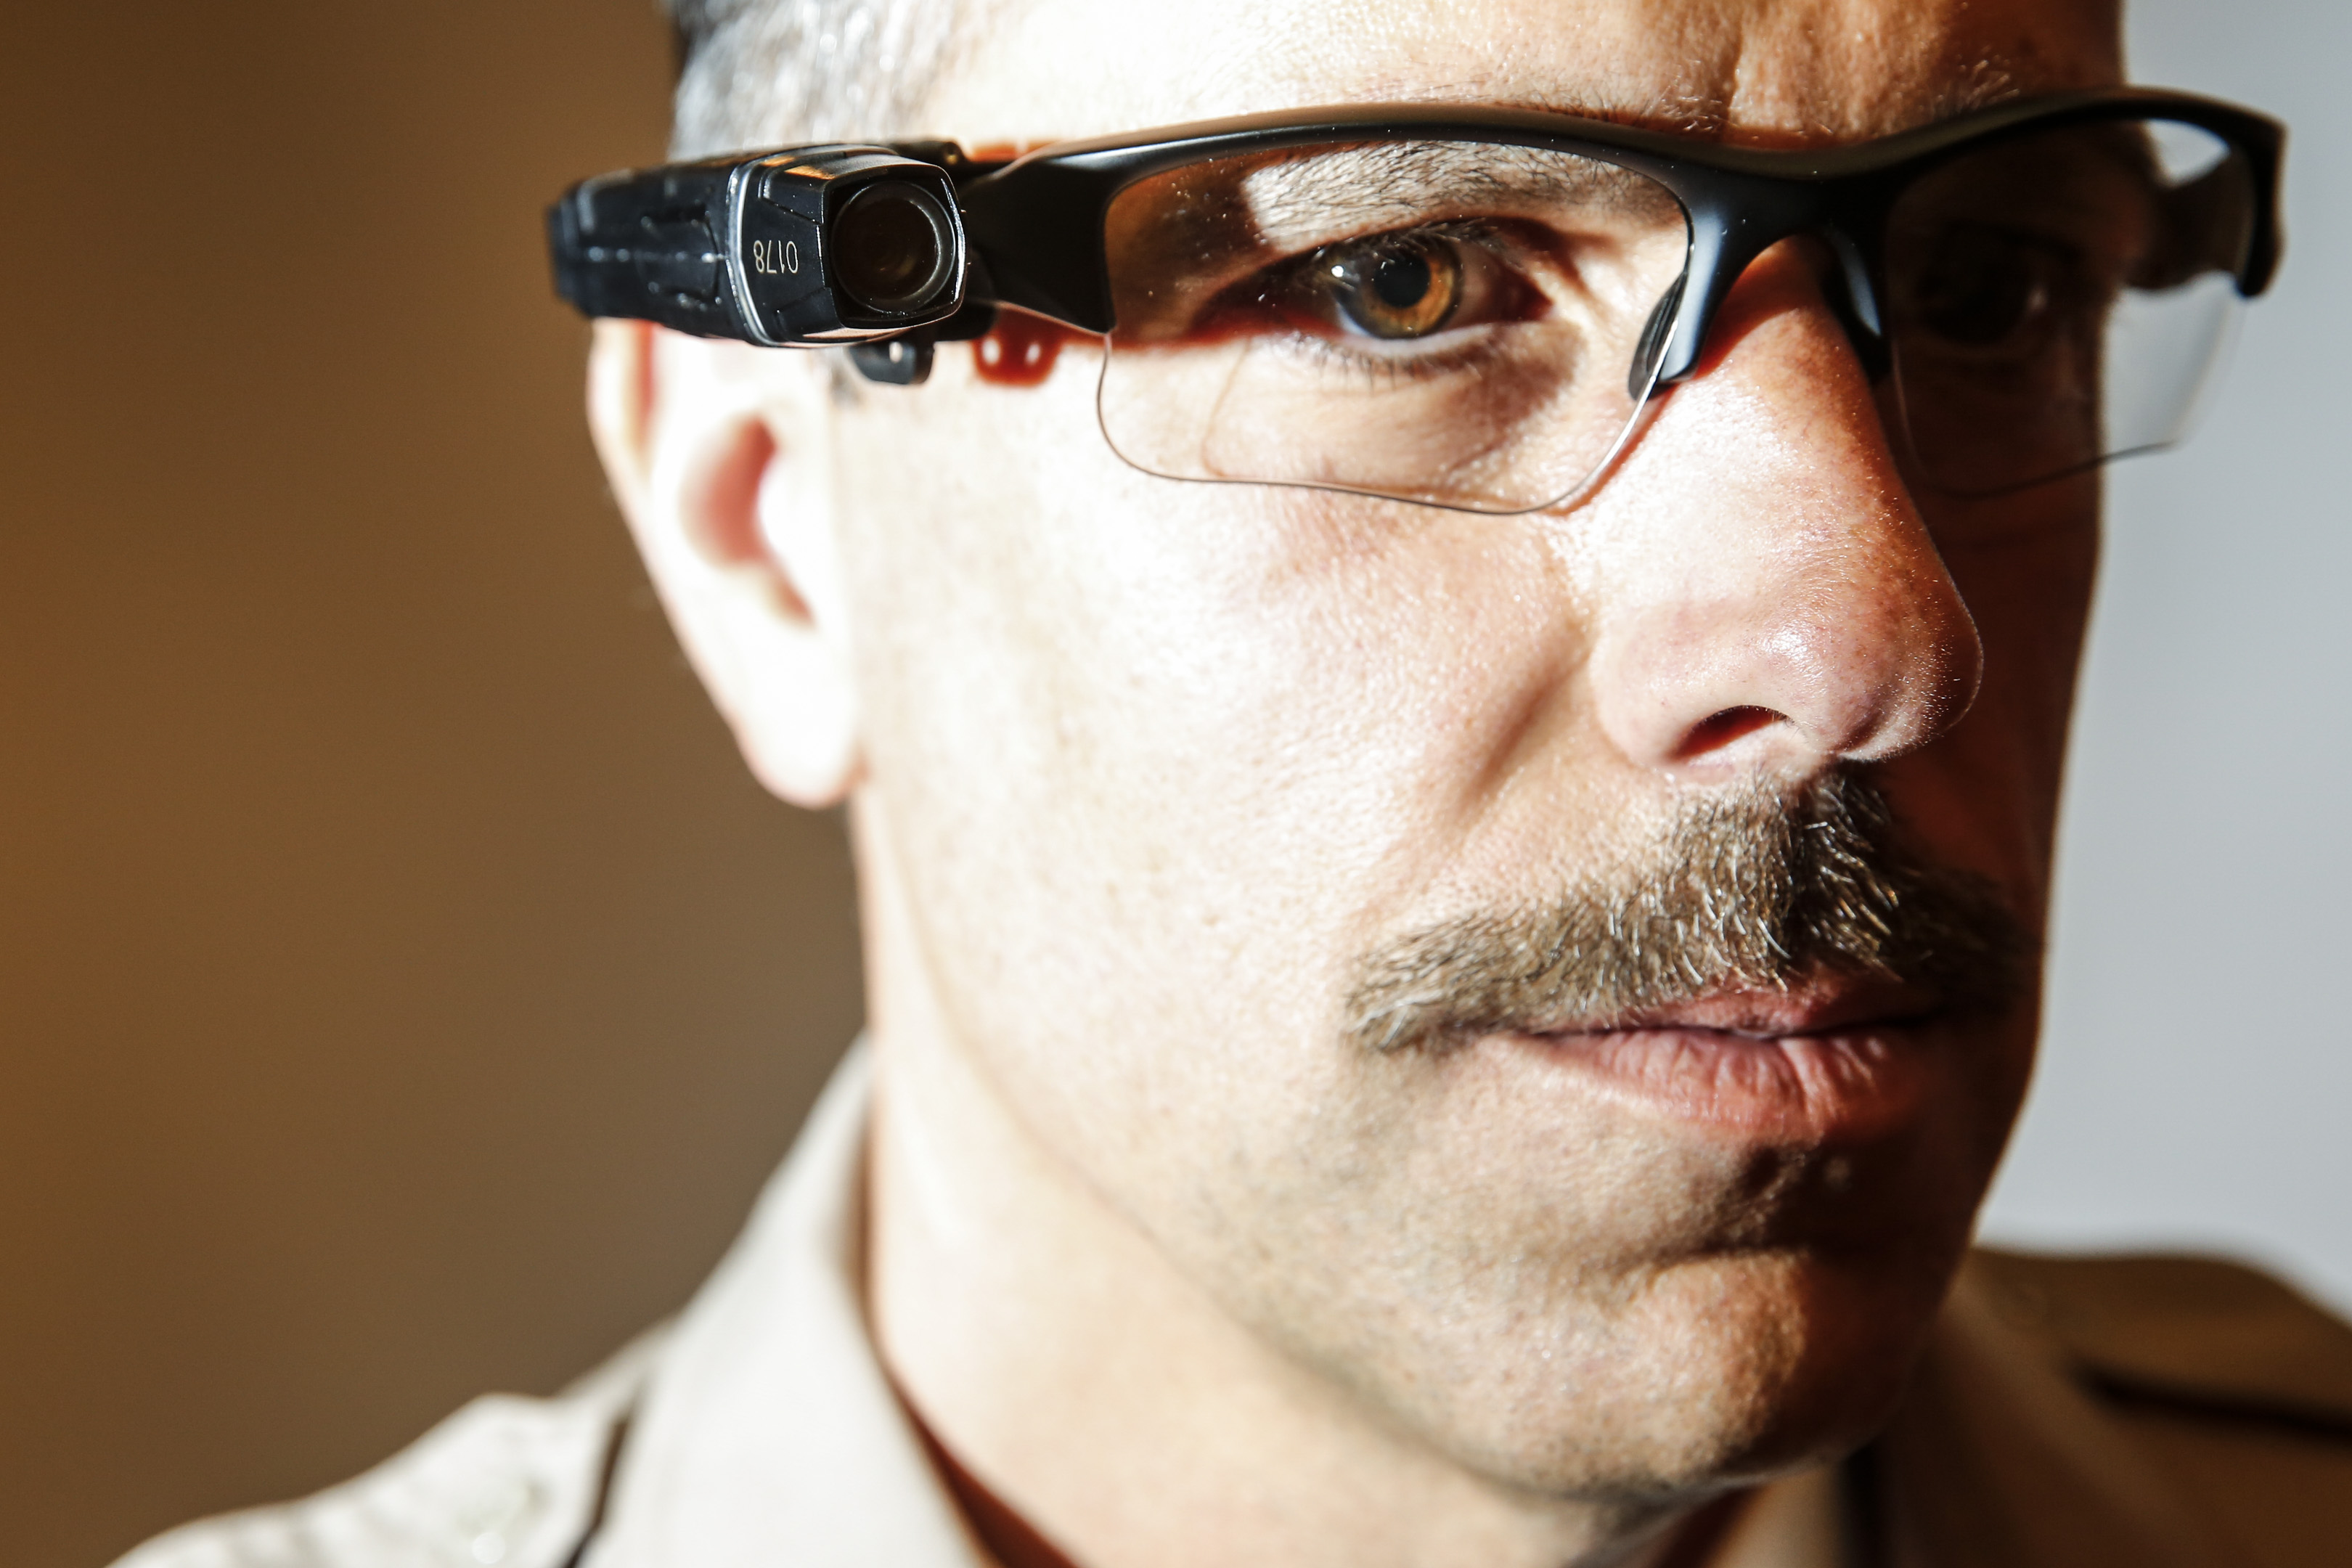 County of Los Angeles Sheriff's Lt. Chris Marks poses wearing the Taser Axon Flex, on-officer camera system attached to glasses in Monterey Park on Sept. 17, 2014. (Jay L. Clendenin—Los Angeles Times/Getty Images)